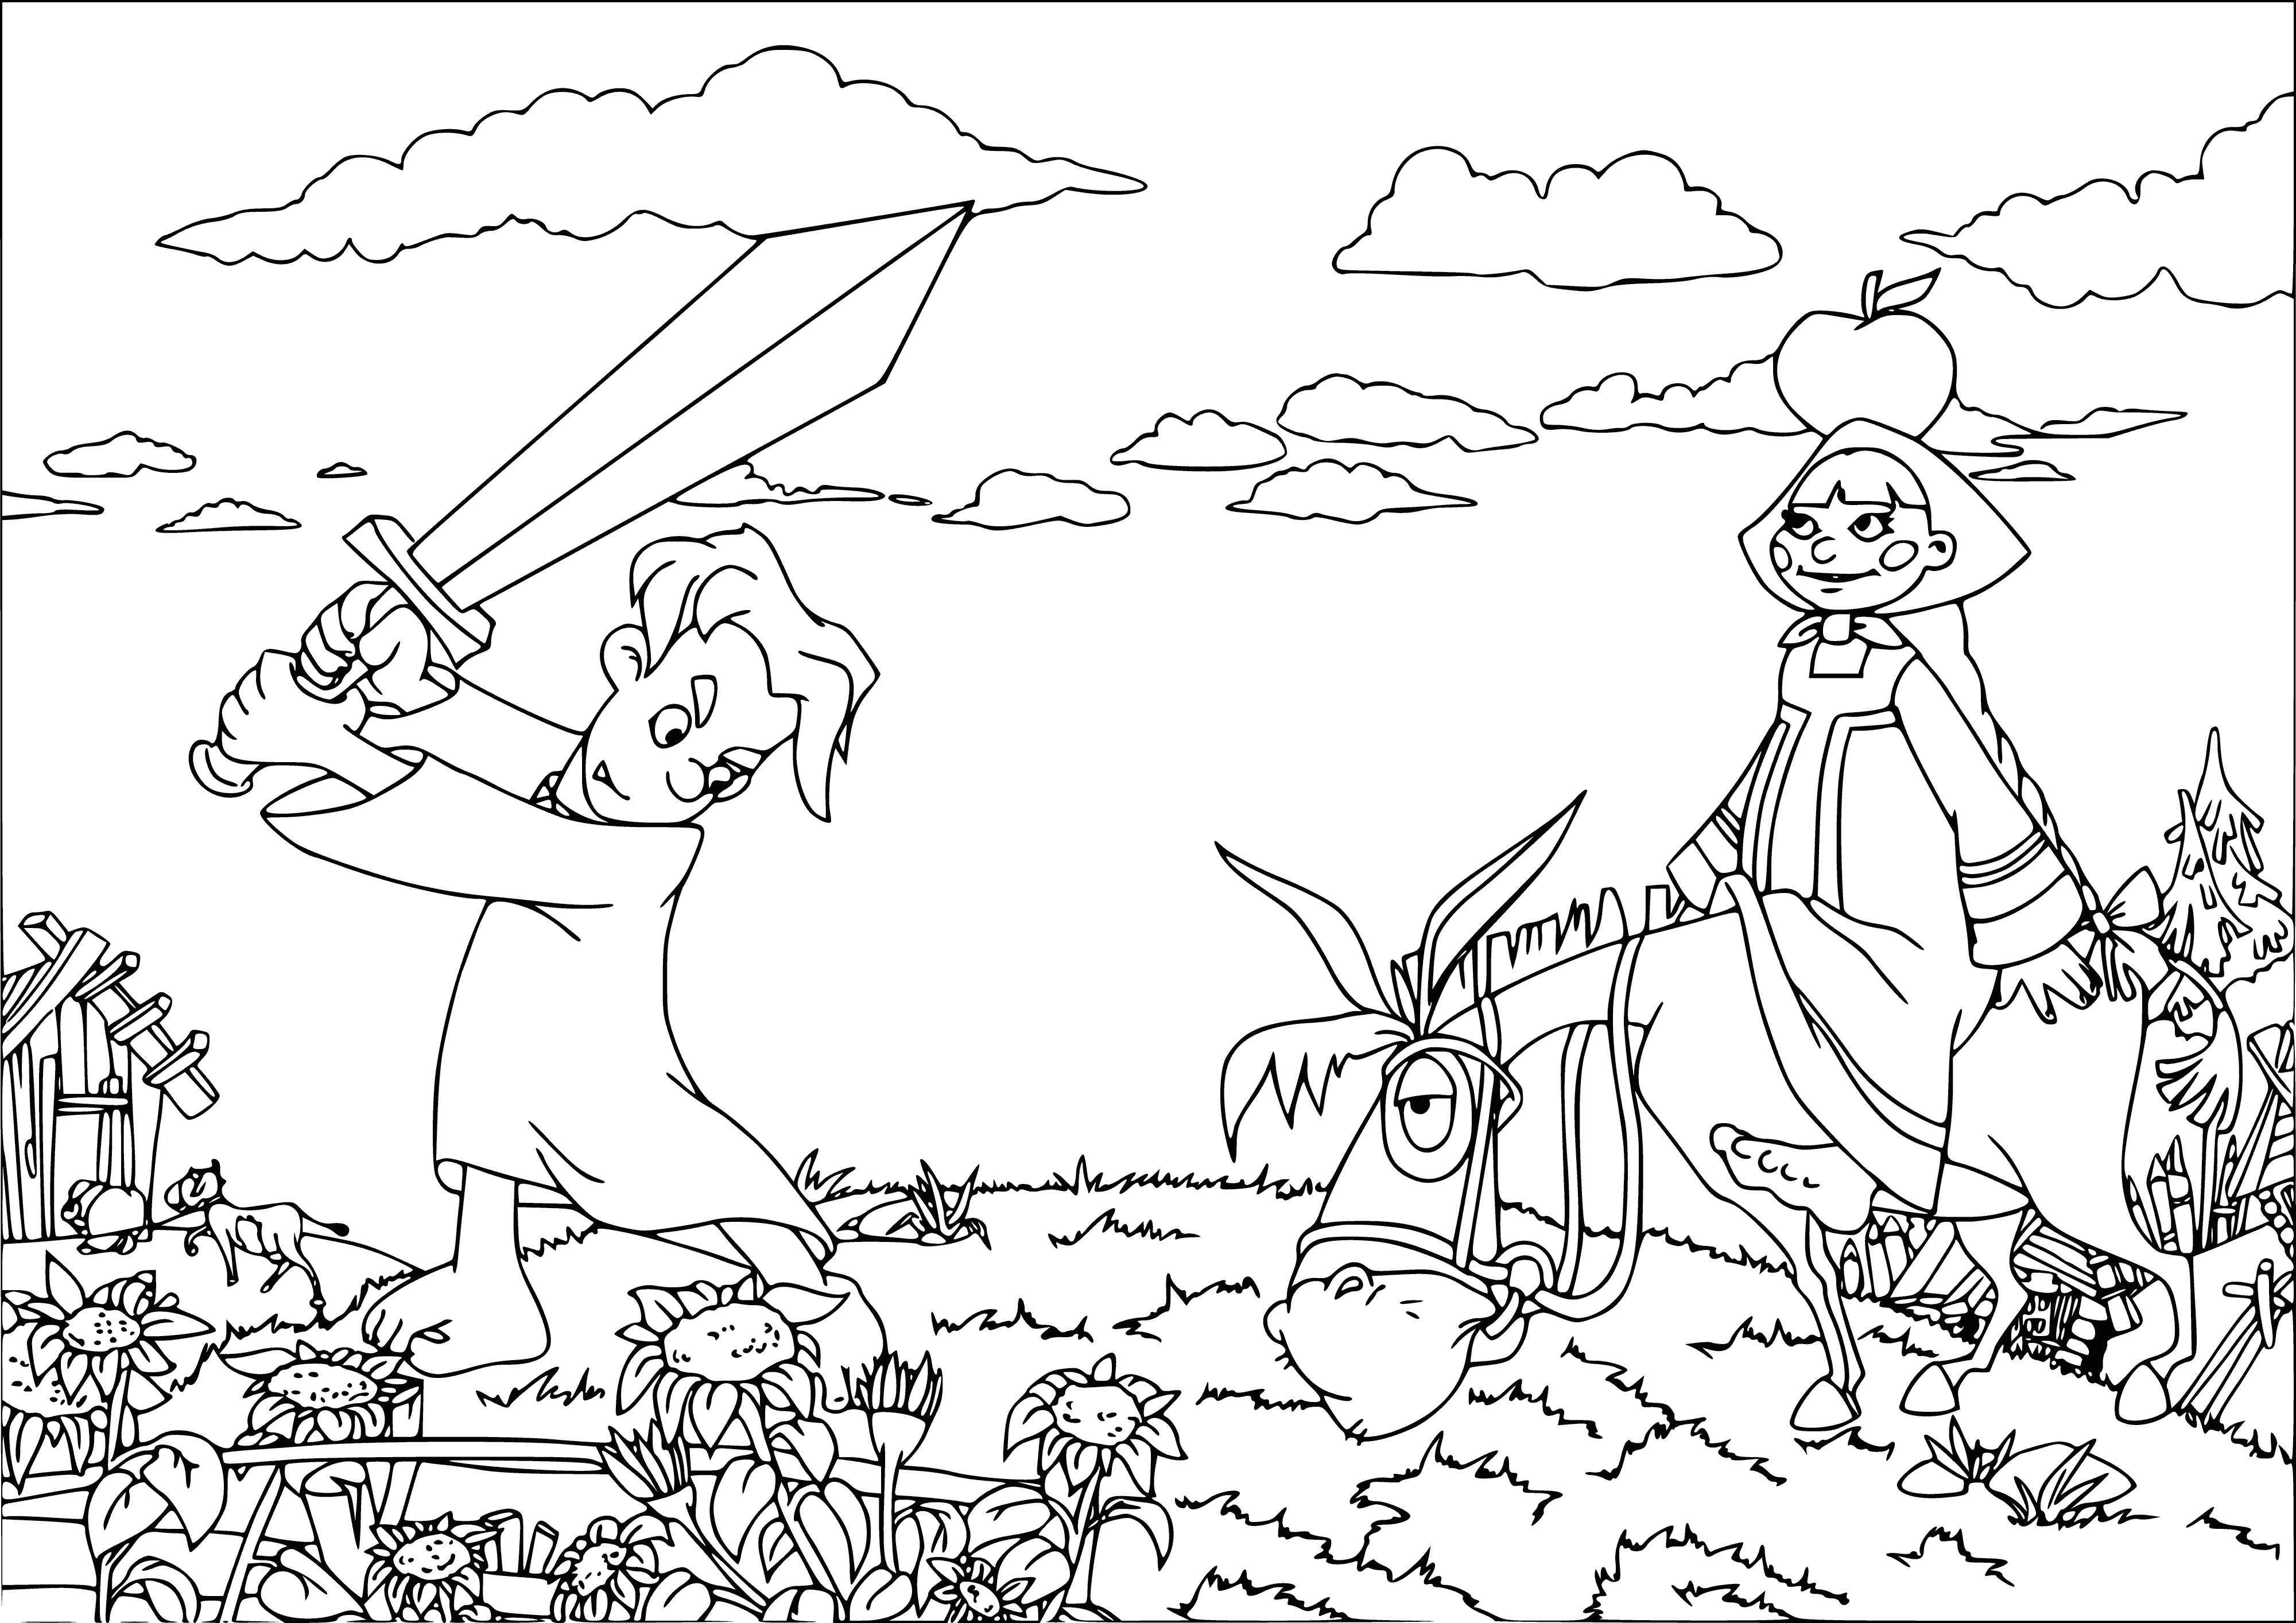 coloring page: Alyosha and Tugarin face off with swords, wearing blue/white tunics and gold trim, brown boots.